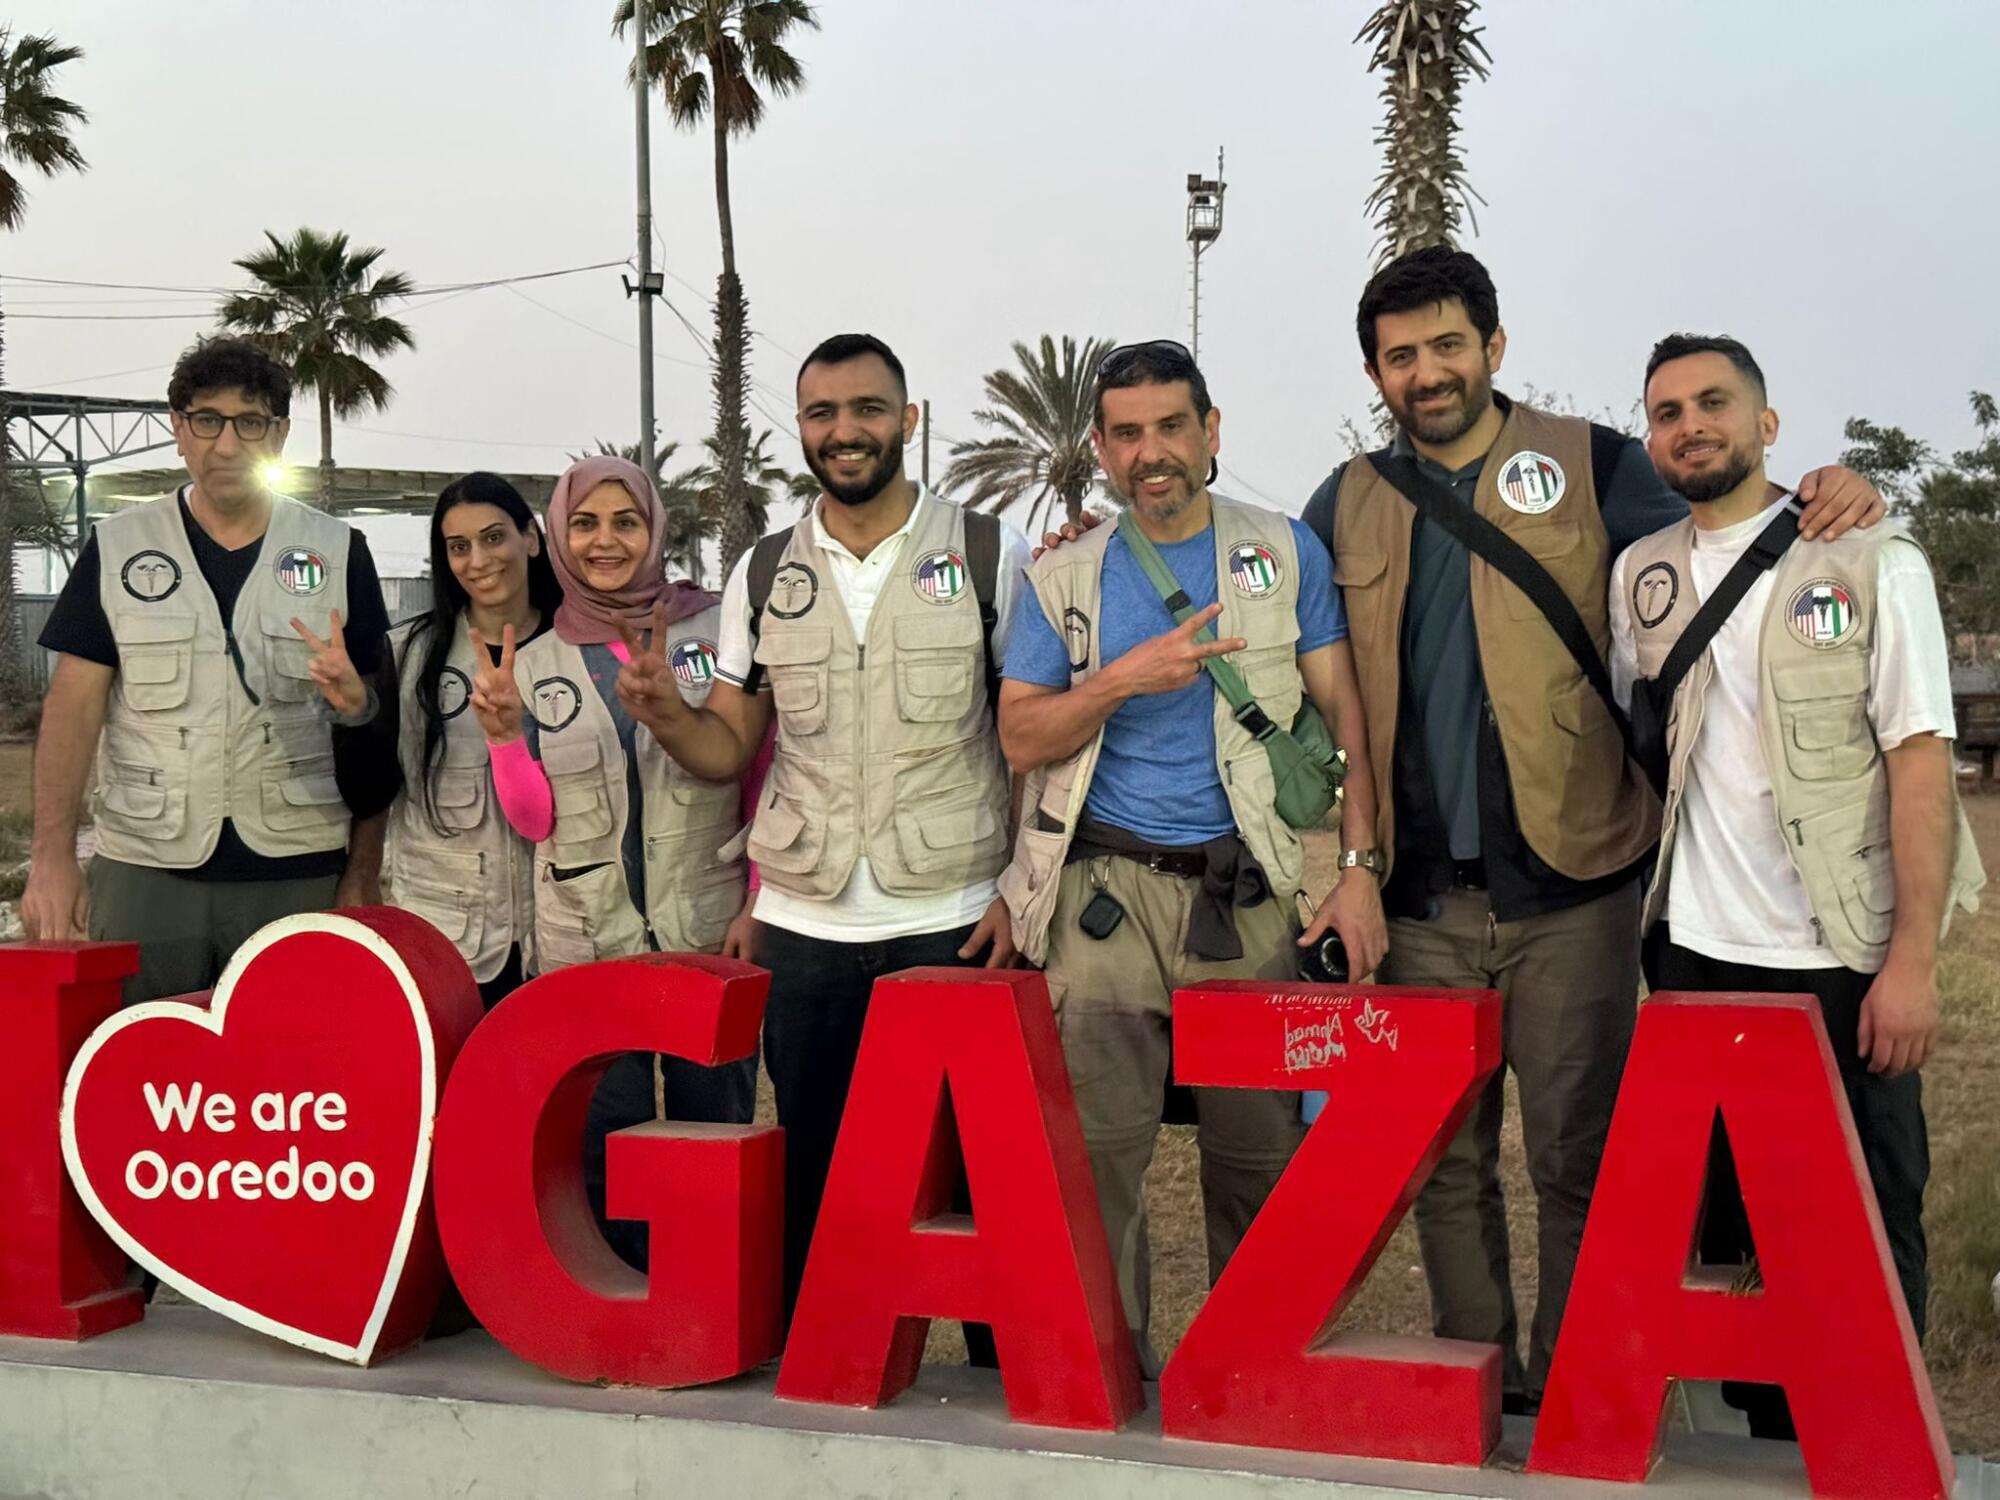 A group of medical workers in vests pose in a "I (heart) Gaza" sign.